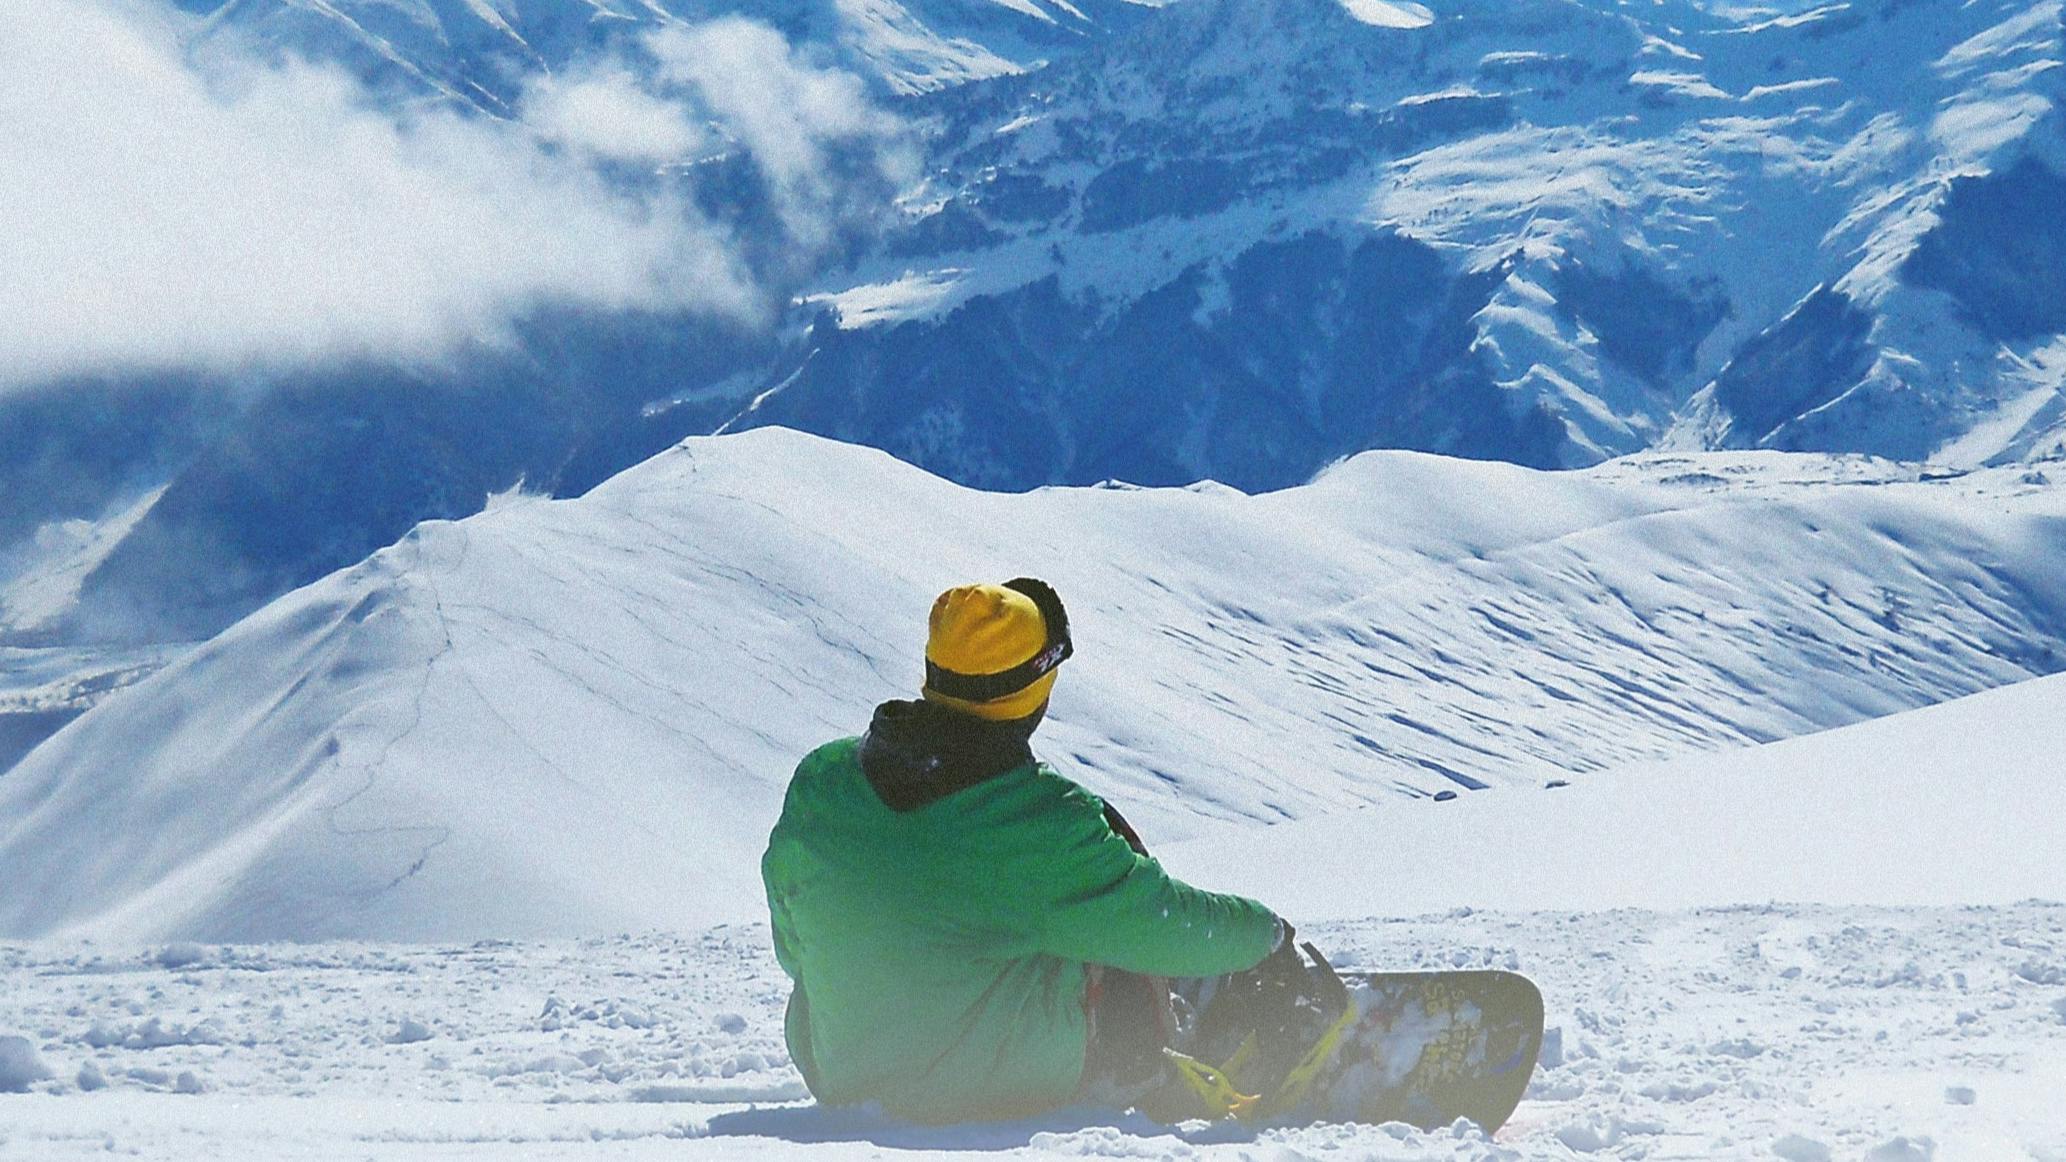 Snowboarder in a green jacket sitting on a snowy slope and looking out at the blue-tinged mountain range in the distance.